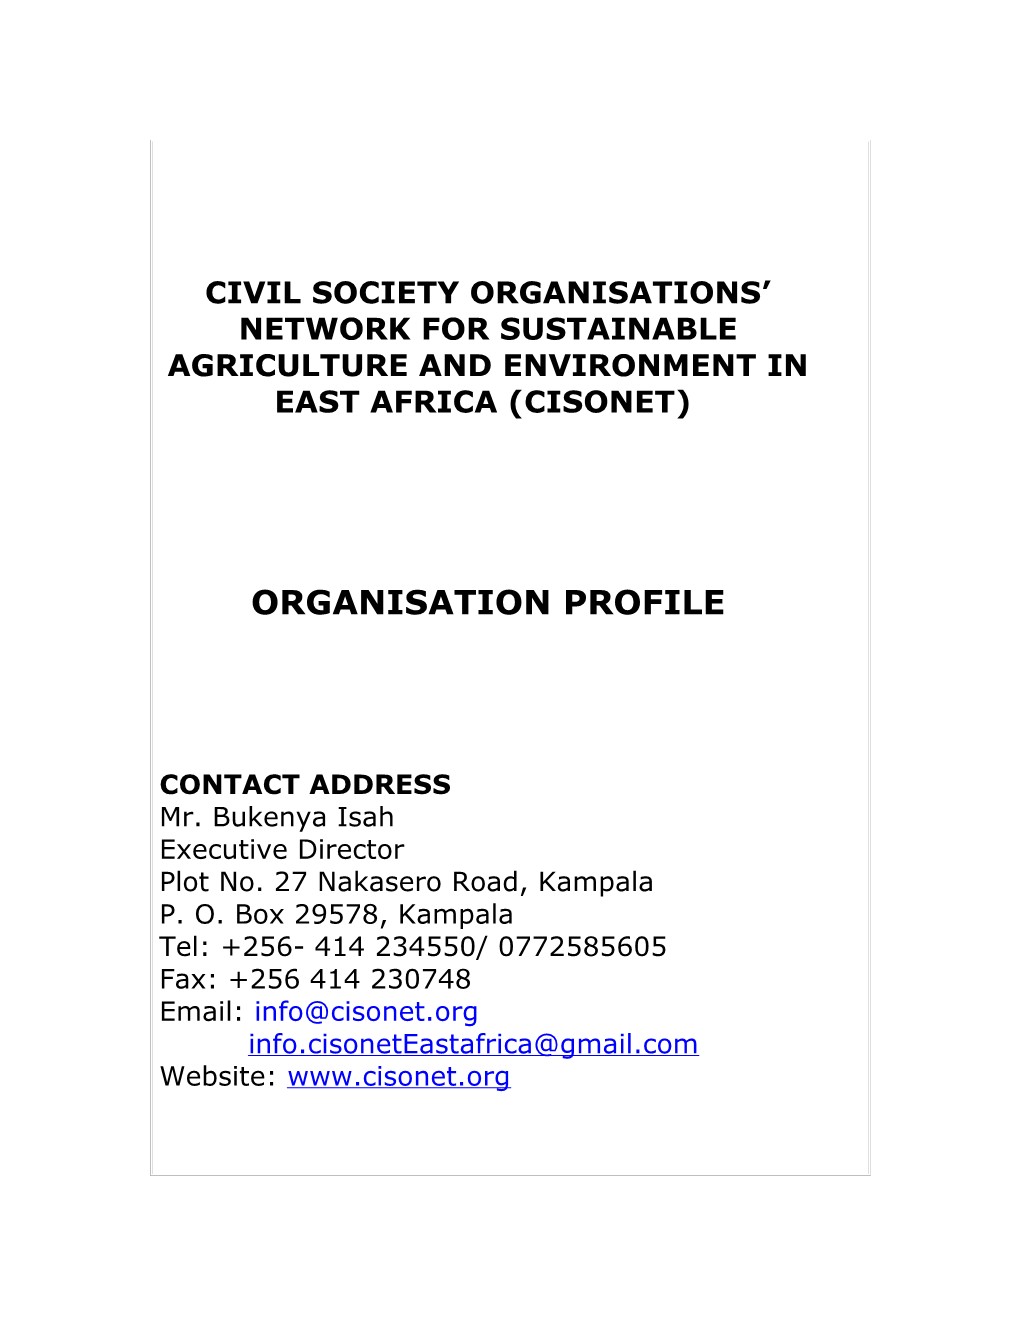 Civil Society Organisations Network for Sustainable Agriculture and Environment in East